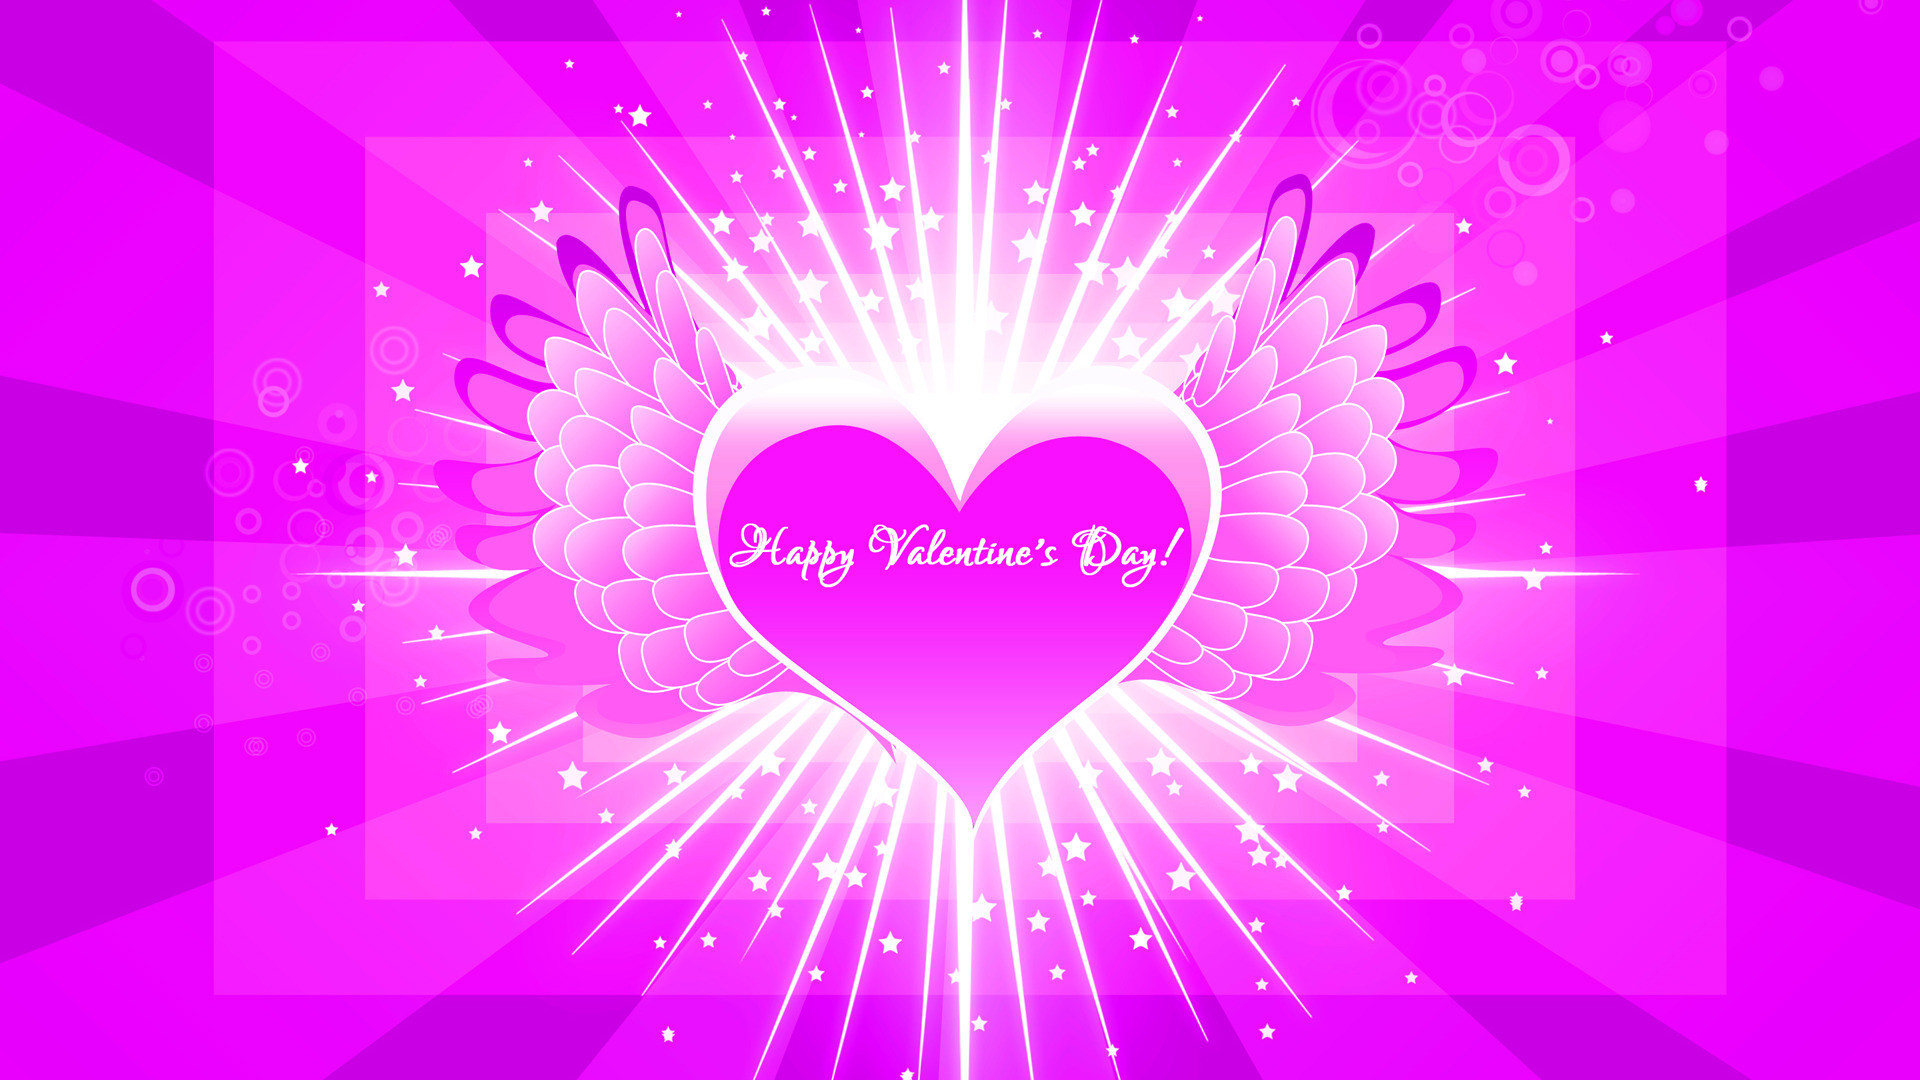 1920x1080 Valentine Day Images Pictures Wallpapers Free Download 1920Ã1080 Happy valentines  day wallpaper free (